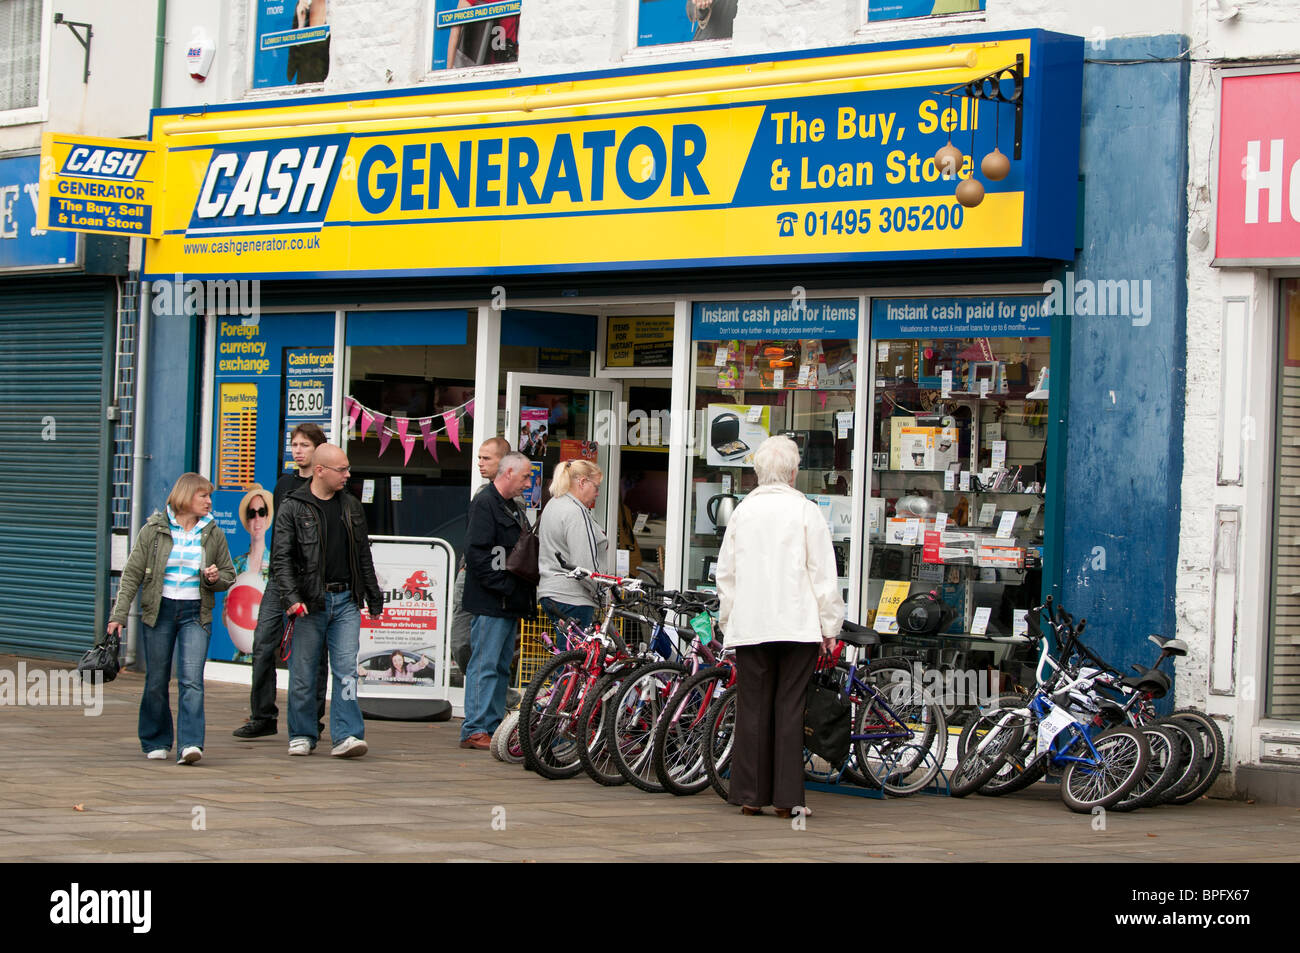 People window shopping outside the Cash Generator high street buy sell and loan franchise pawn shop, Ebbw Vale, South Wales, UK Stock Photo